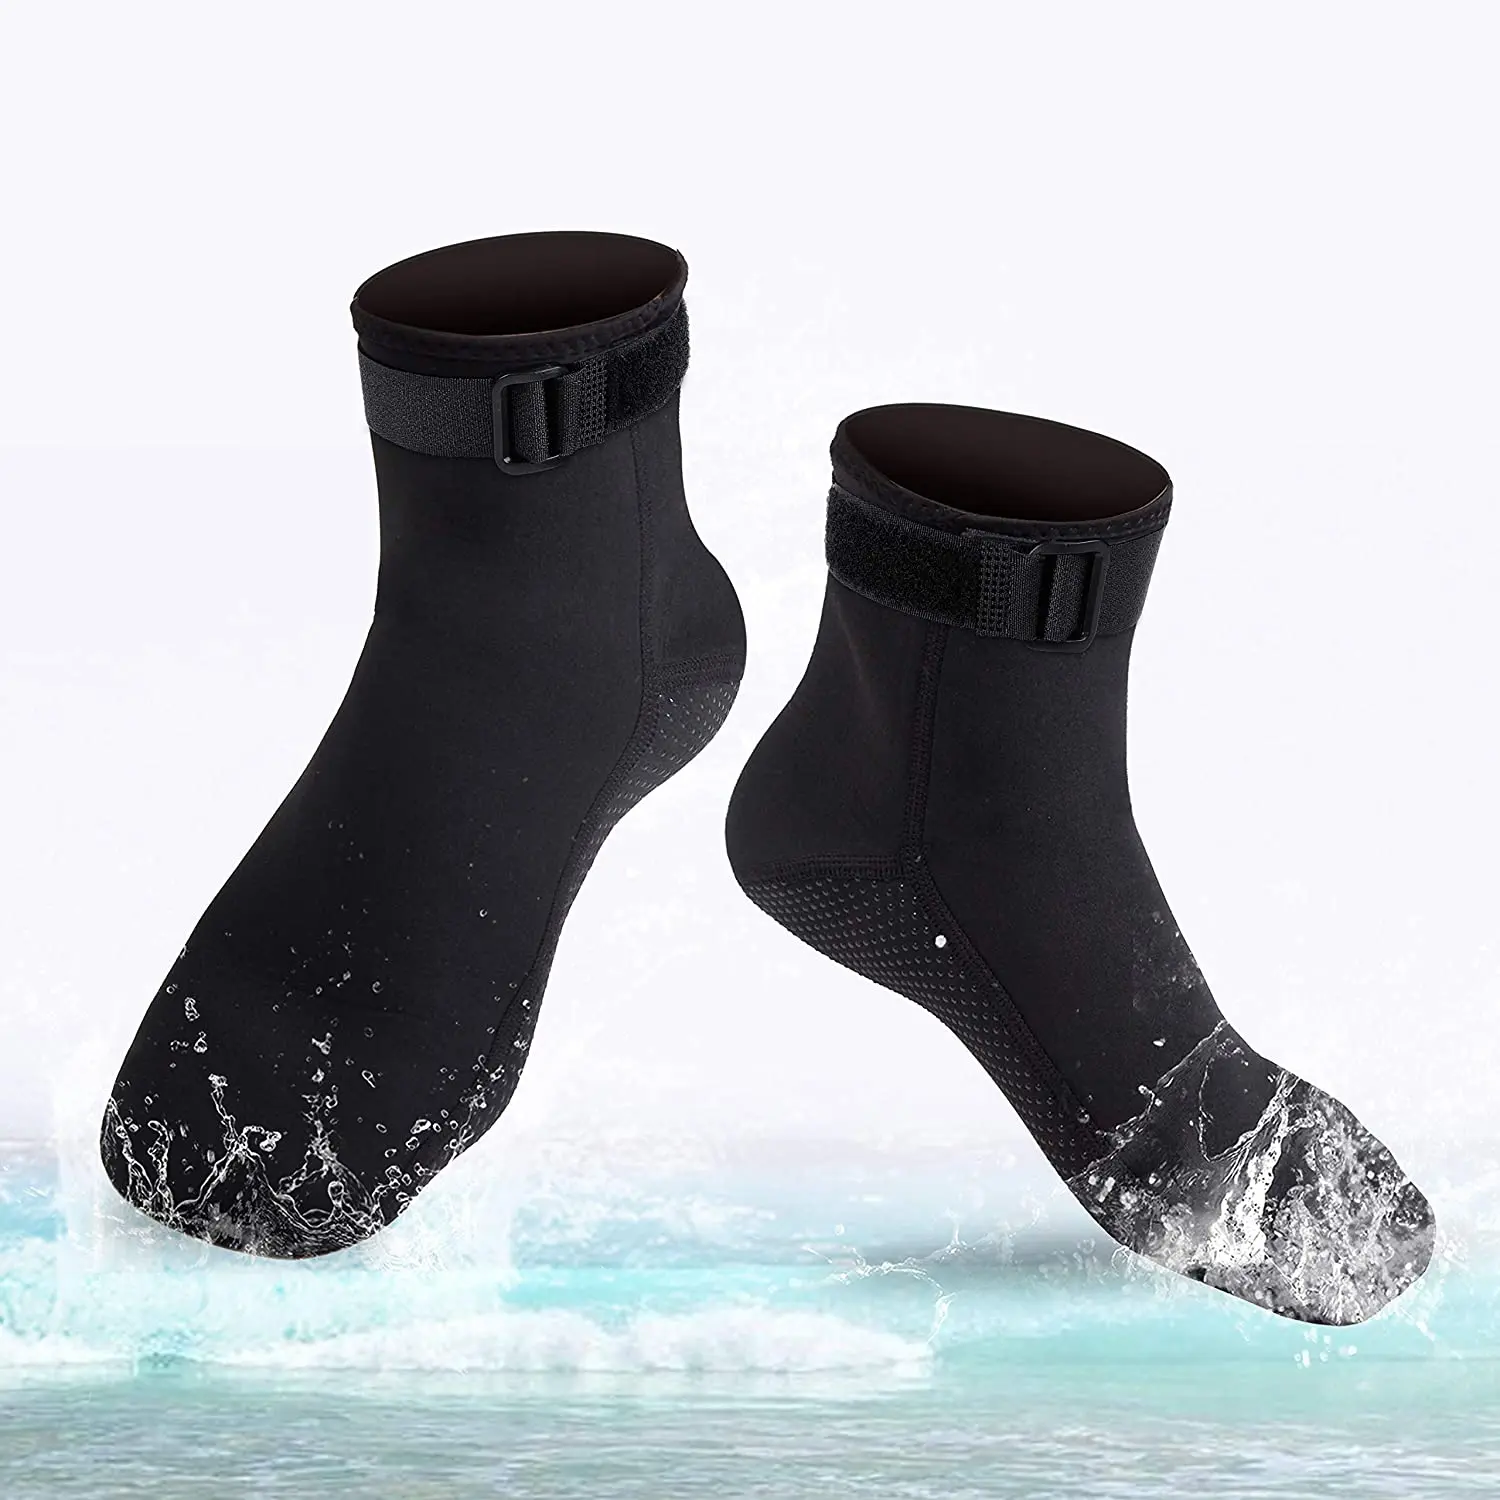 3.5mm Neoprene Diving Socks Boots Water Shoes Non-slip Beach Boots Wetsuit Shoes 